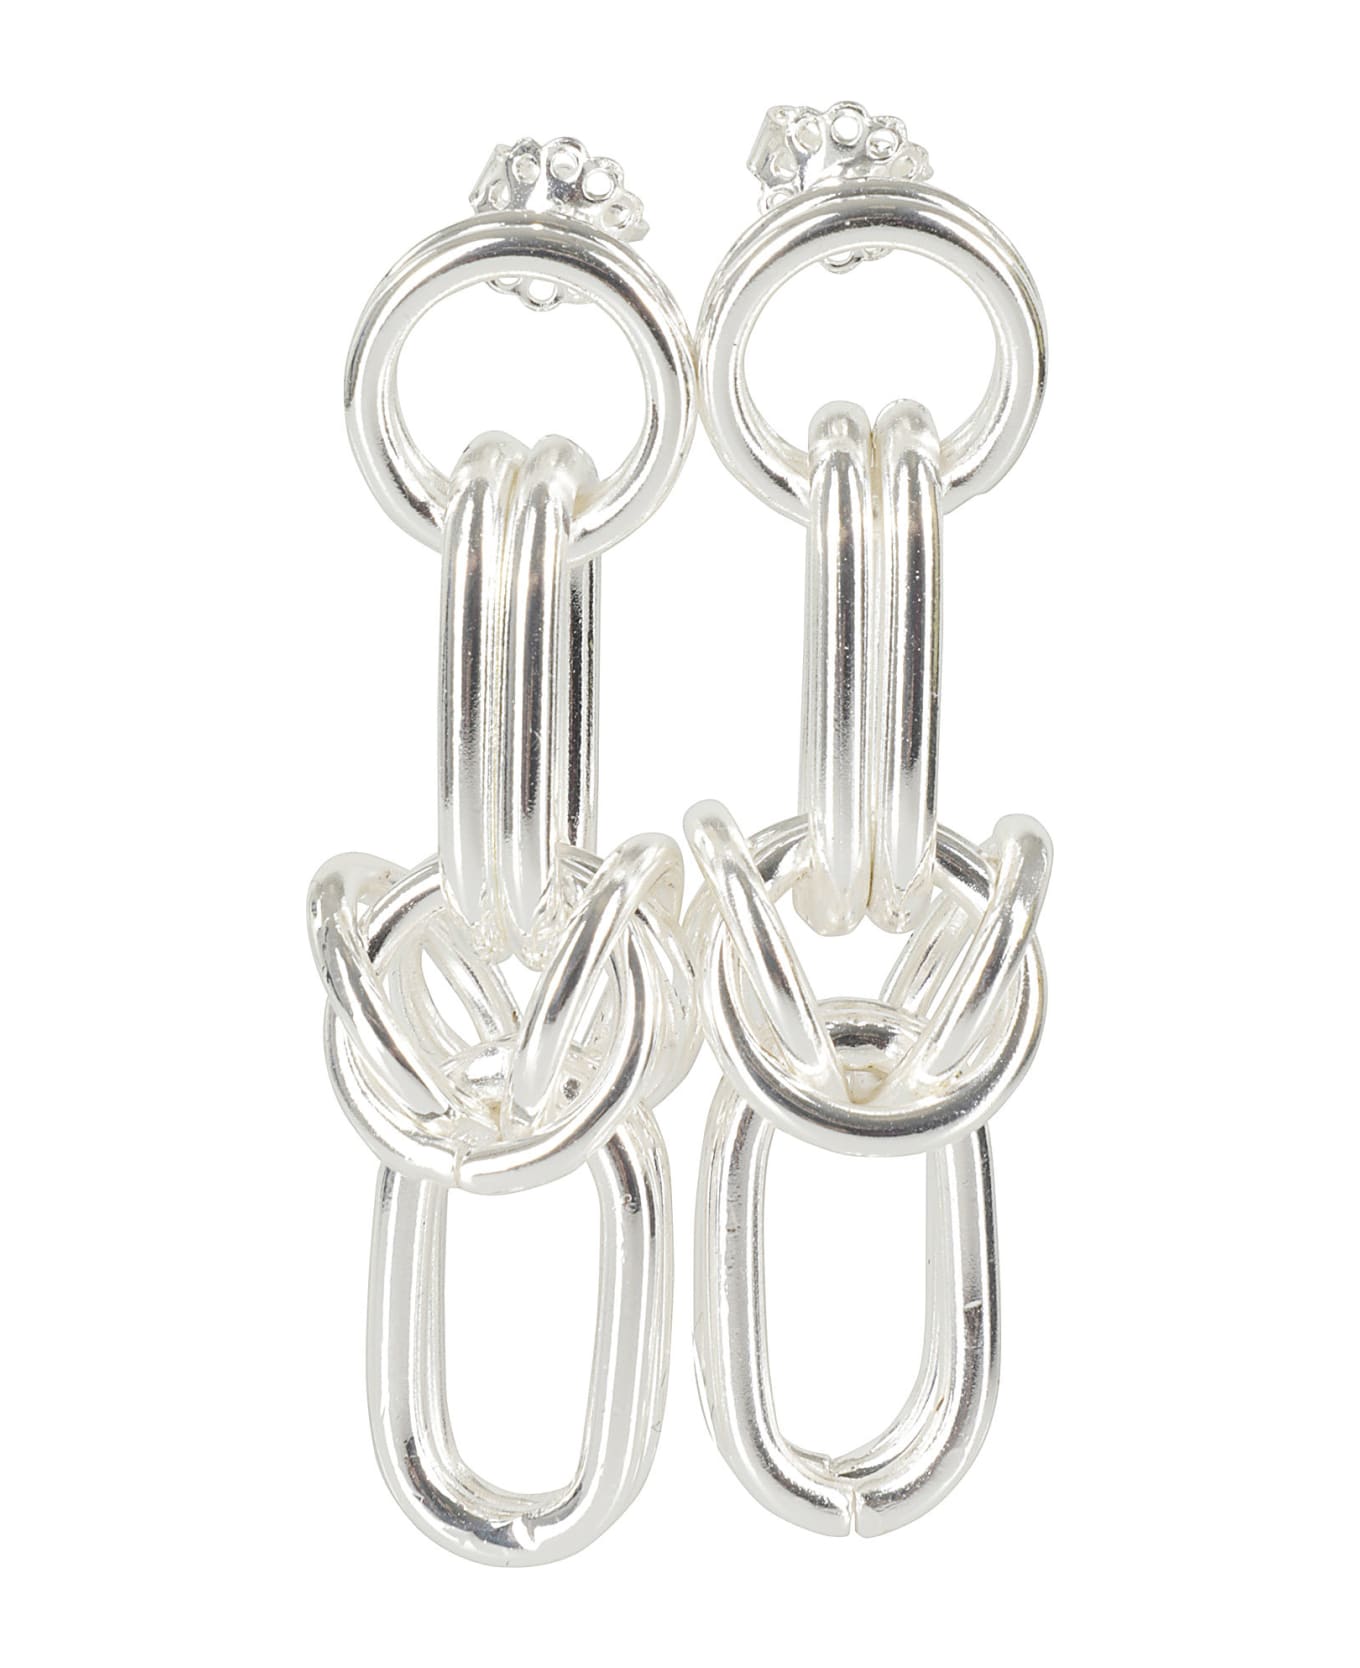 Federica Tosi Earring Cecile - Silver